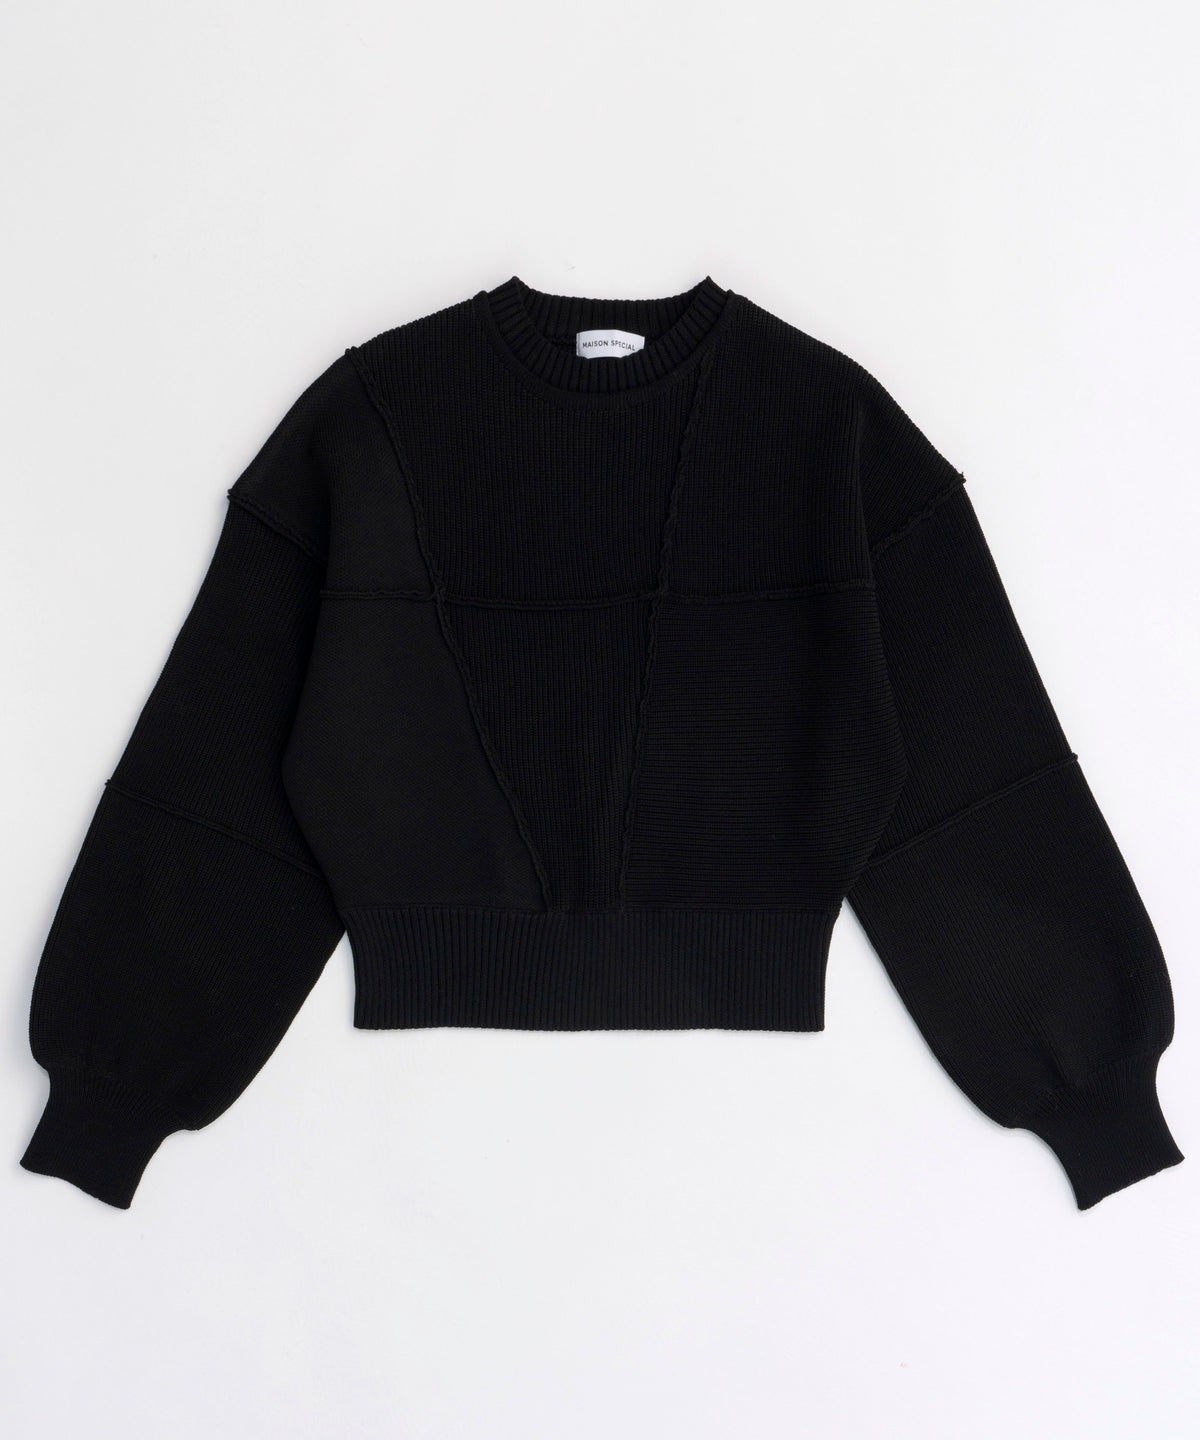 【24AUTUMN PRE-ORDER】Outseam Cocoon Sleeve Knitwear